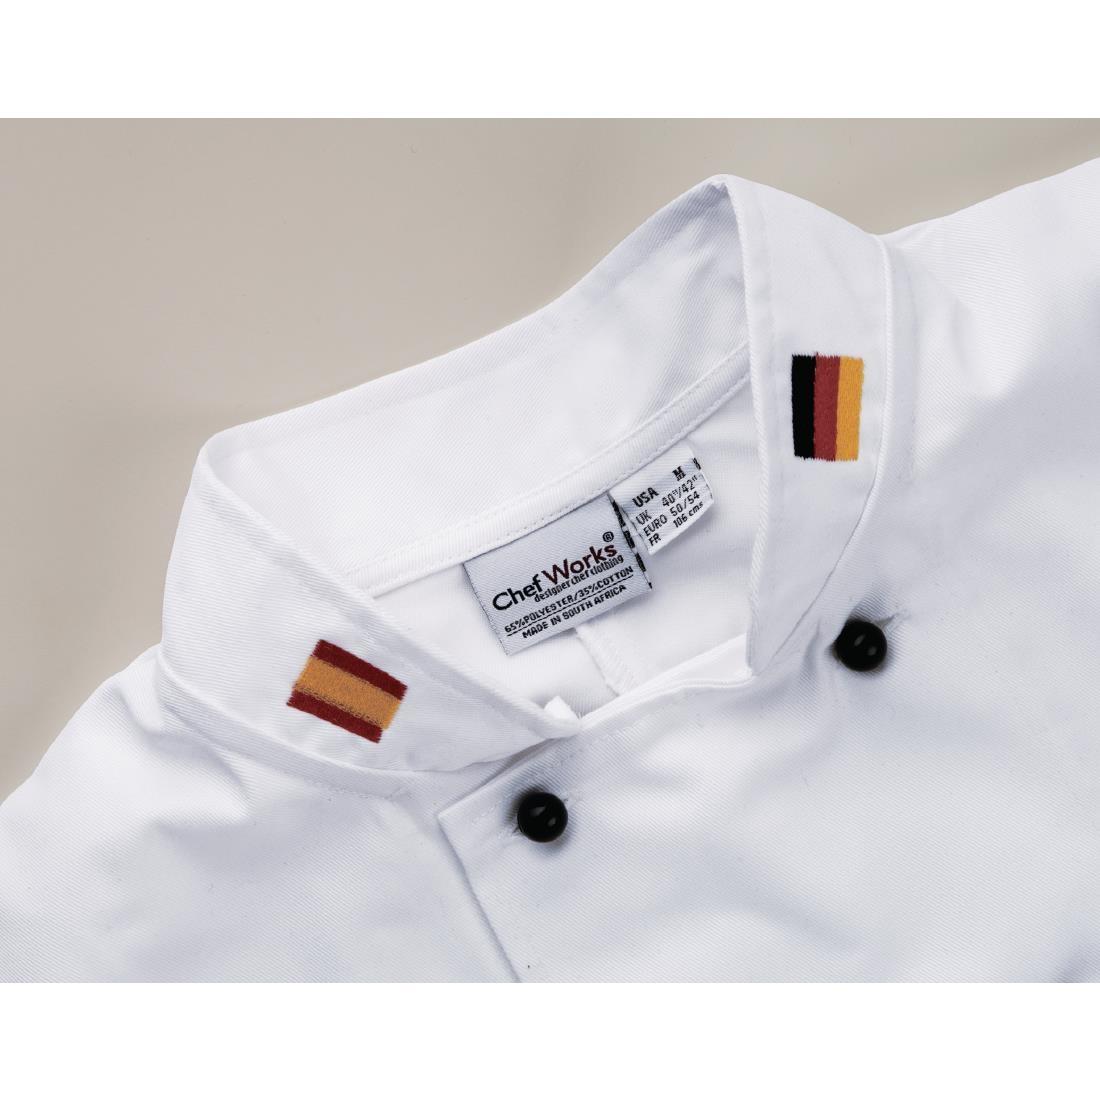 Embroidery Collar Flags - A987-IE  - 1